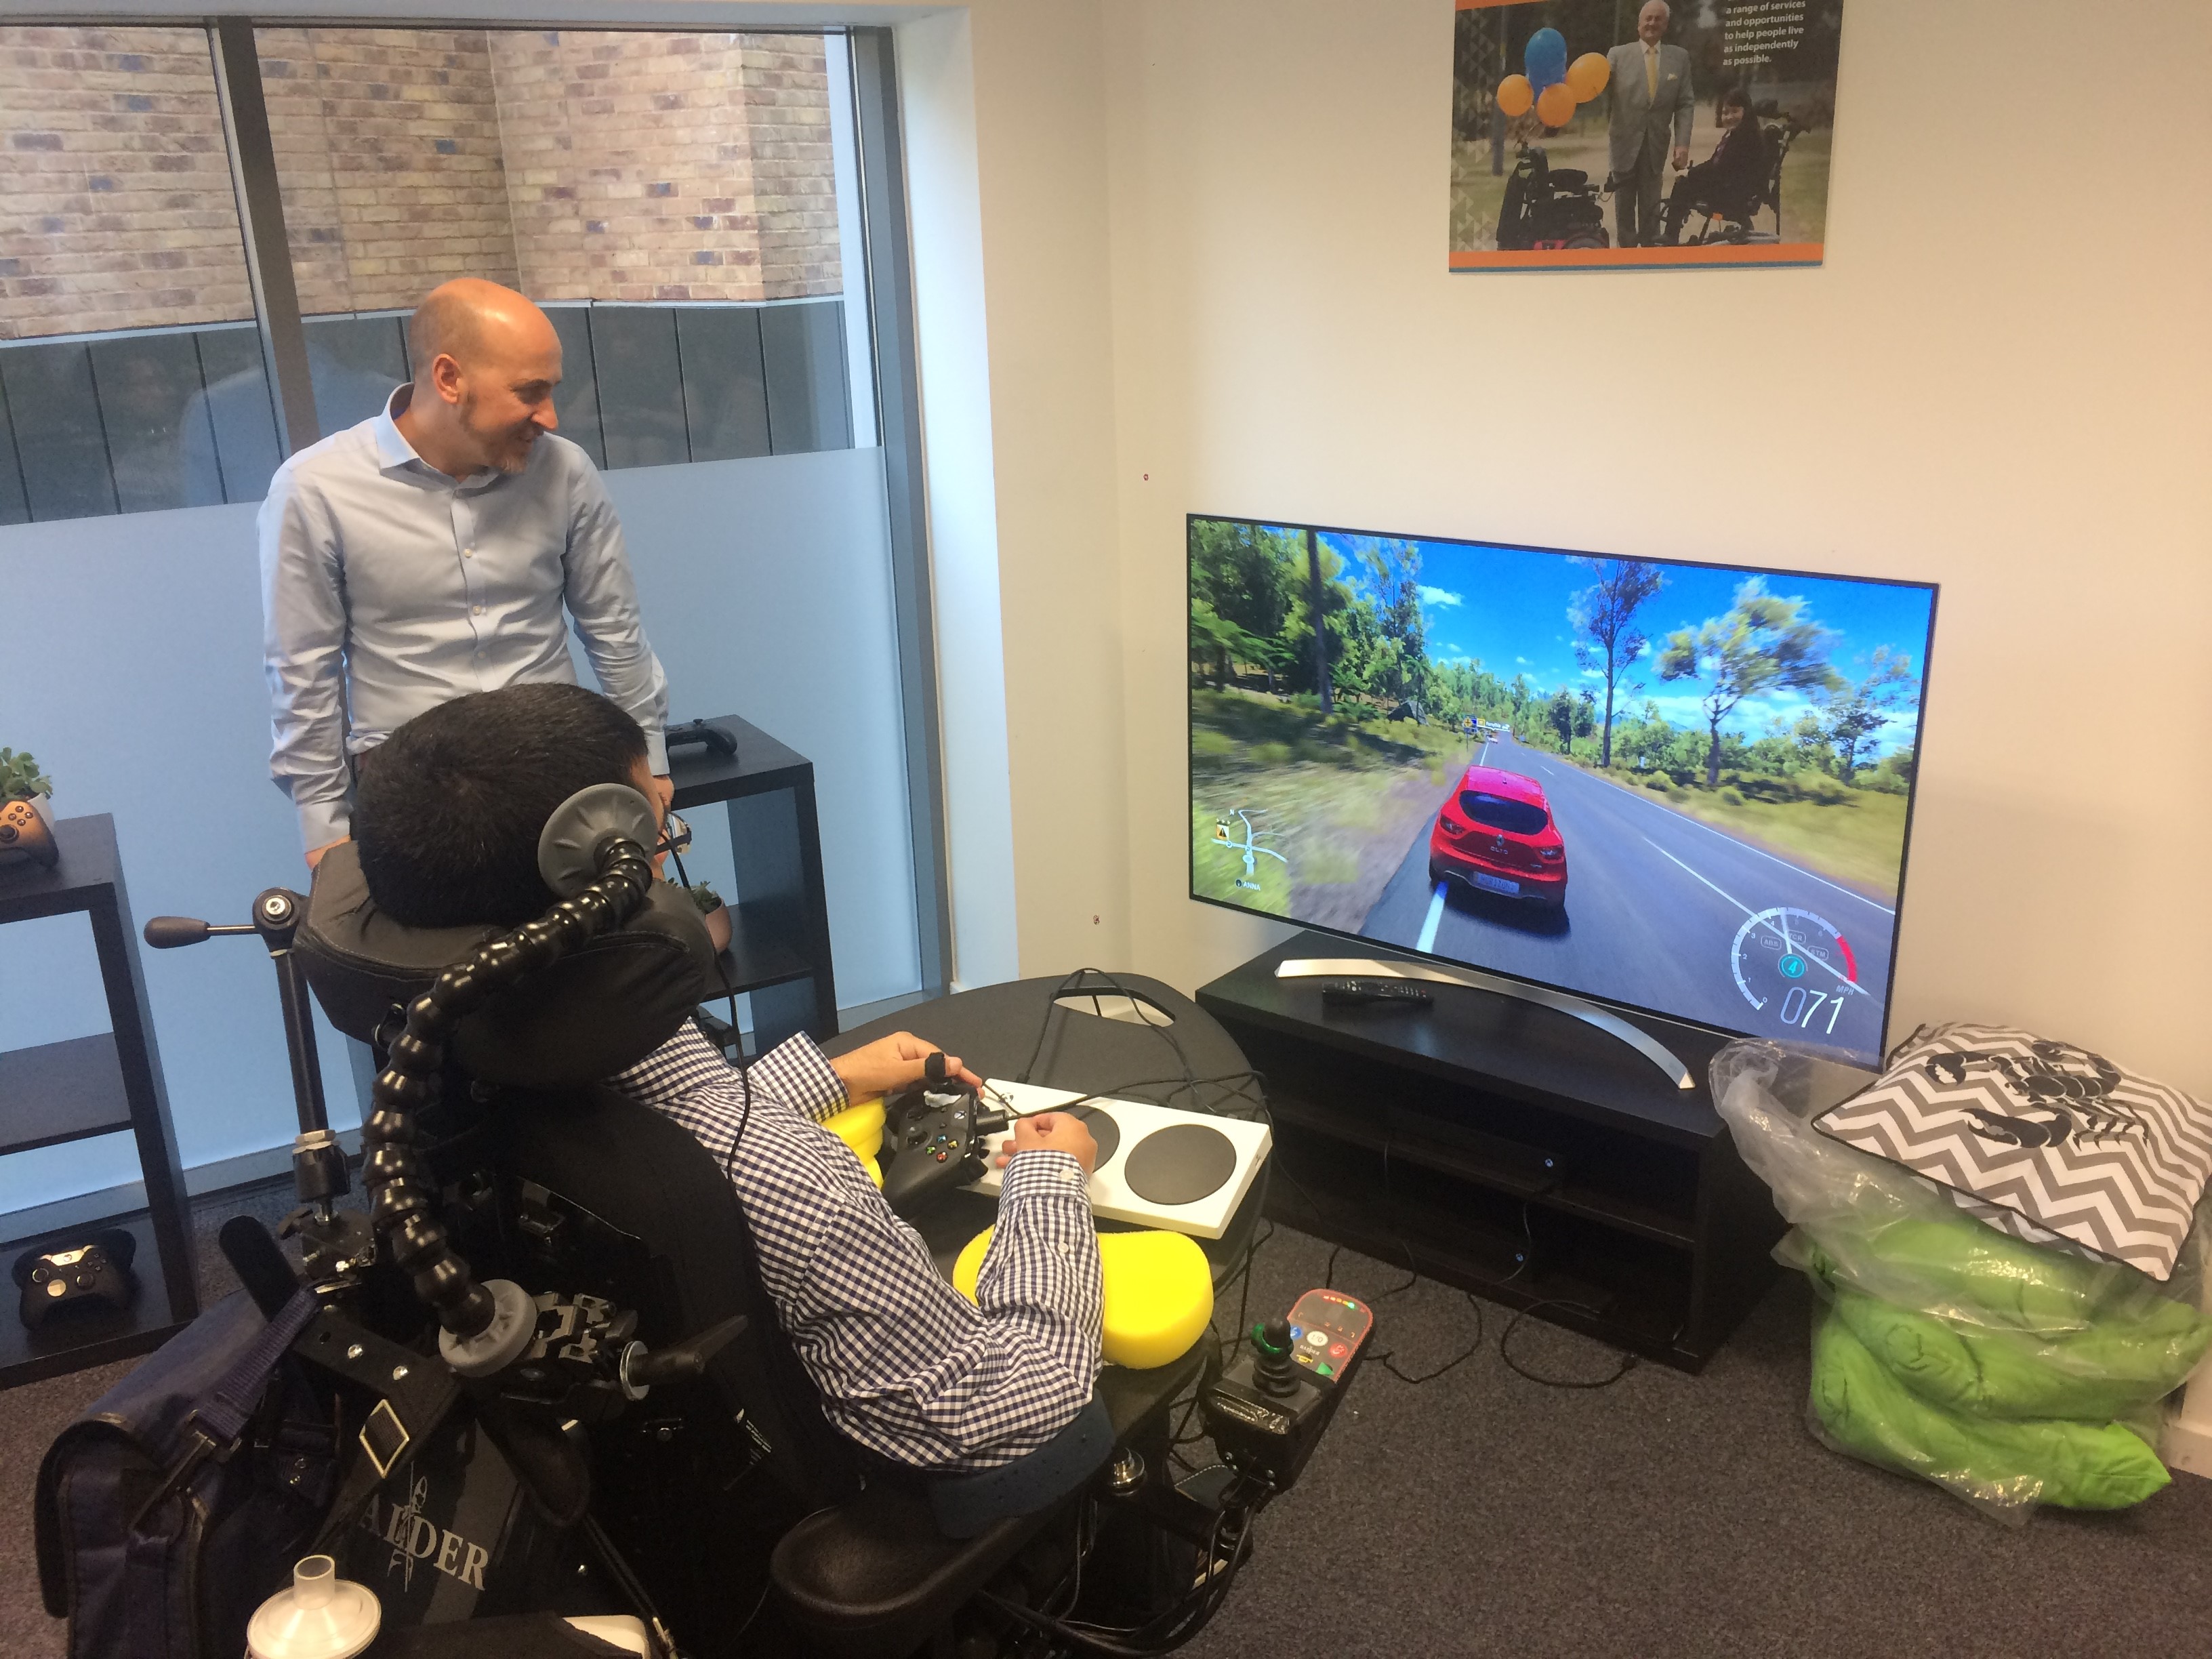 Hector Minto, from Microsoft, watches Vivek Gohill play Forza Horizon 3 using the George Dowell plays FIFA with the Xbox Adaptive Controller